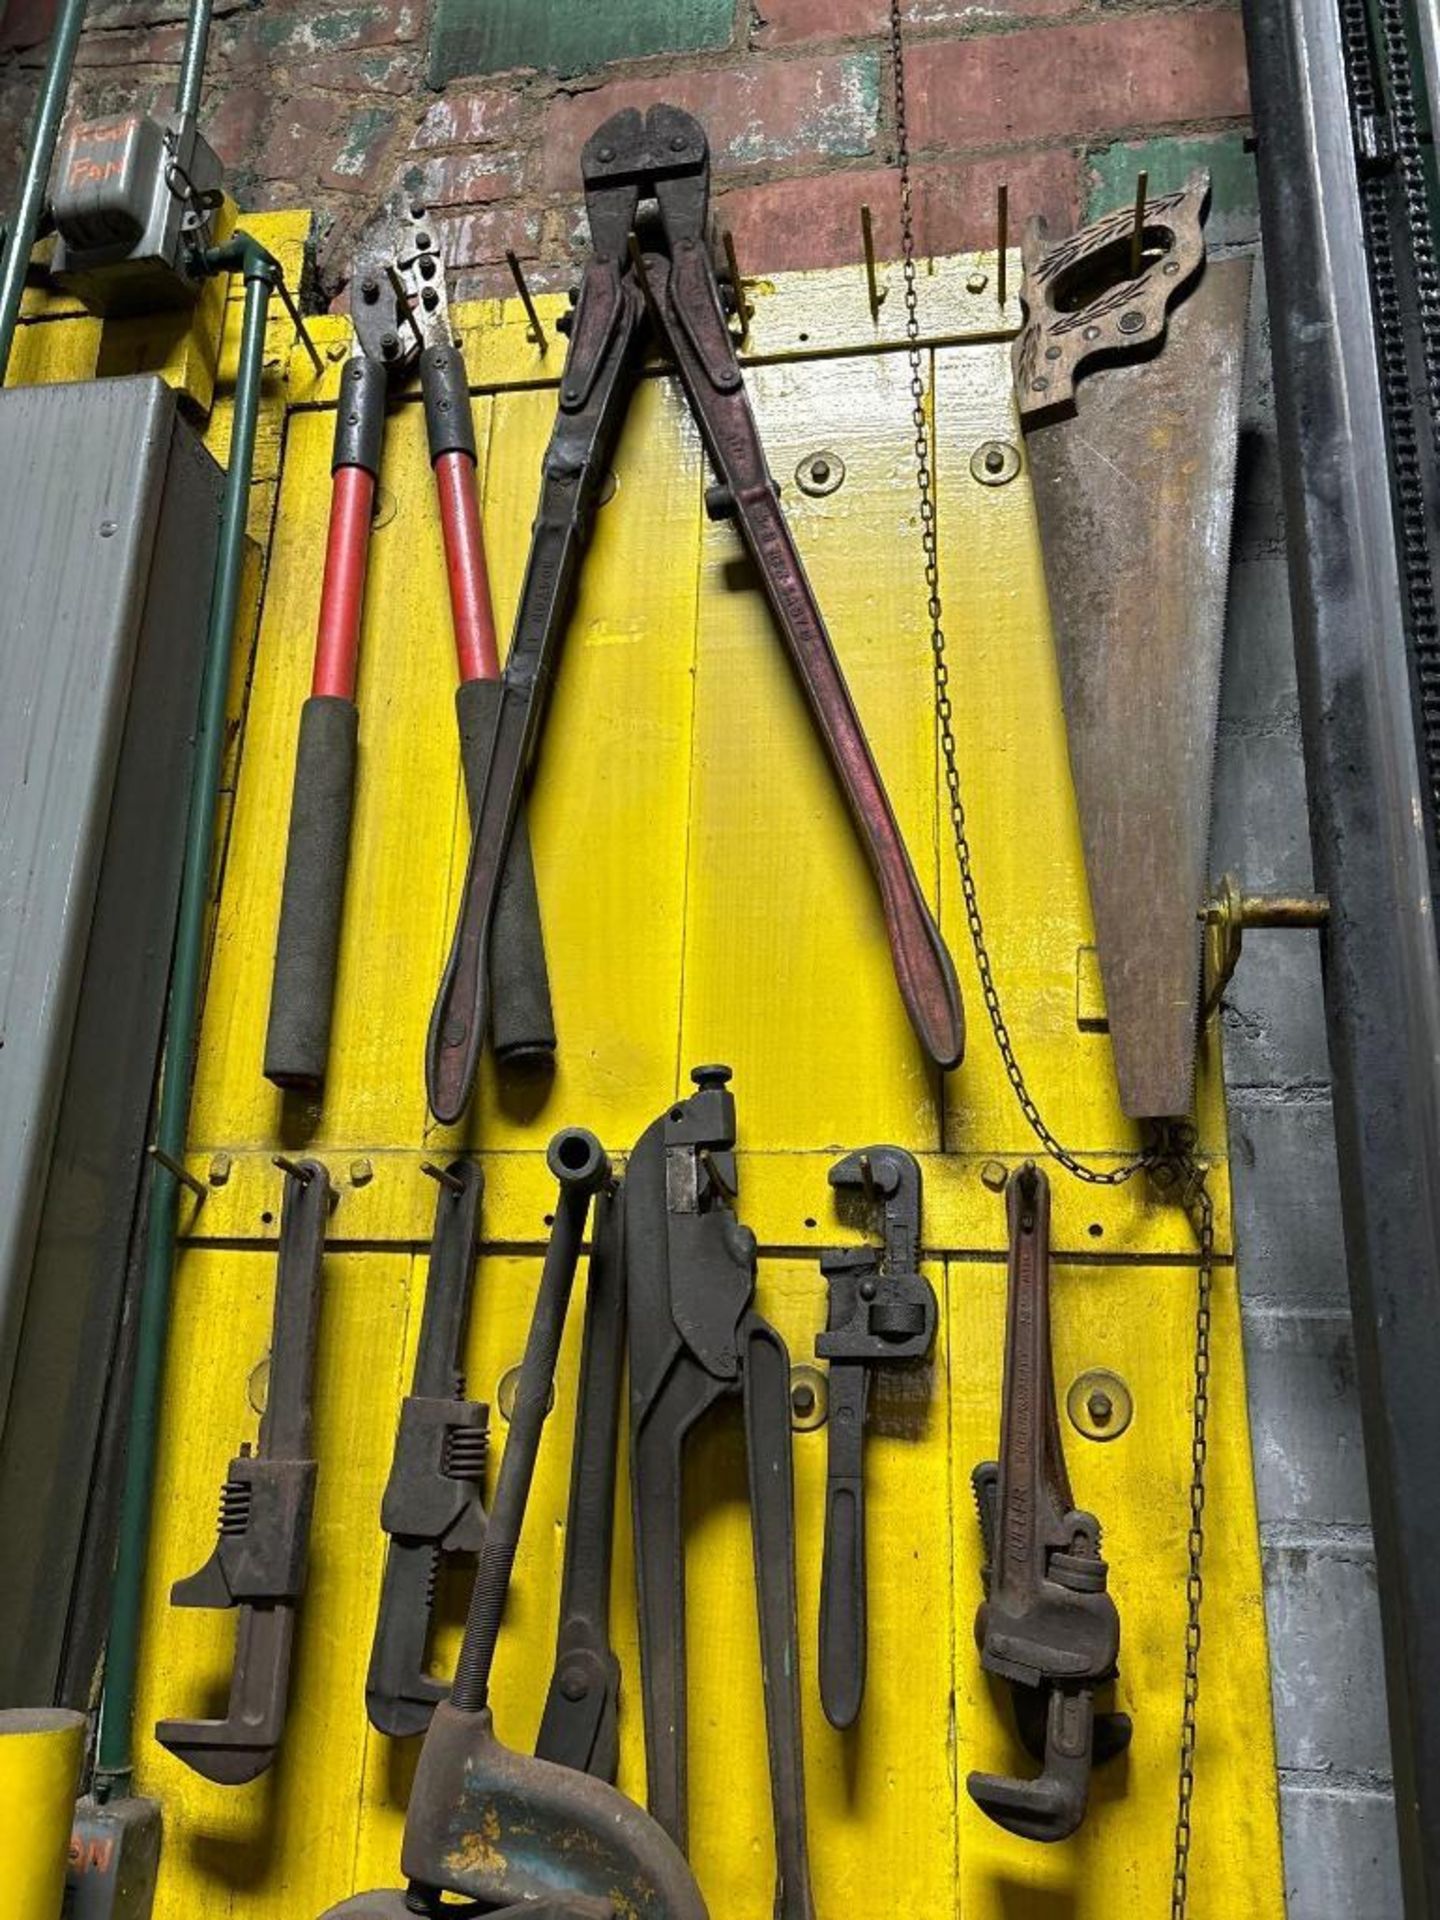 Wall of Pipe Cutters, Pipe Wrenches, and Bolt Cutters - Image 3 of 4